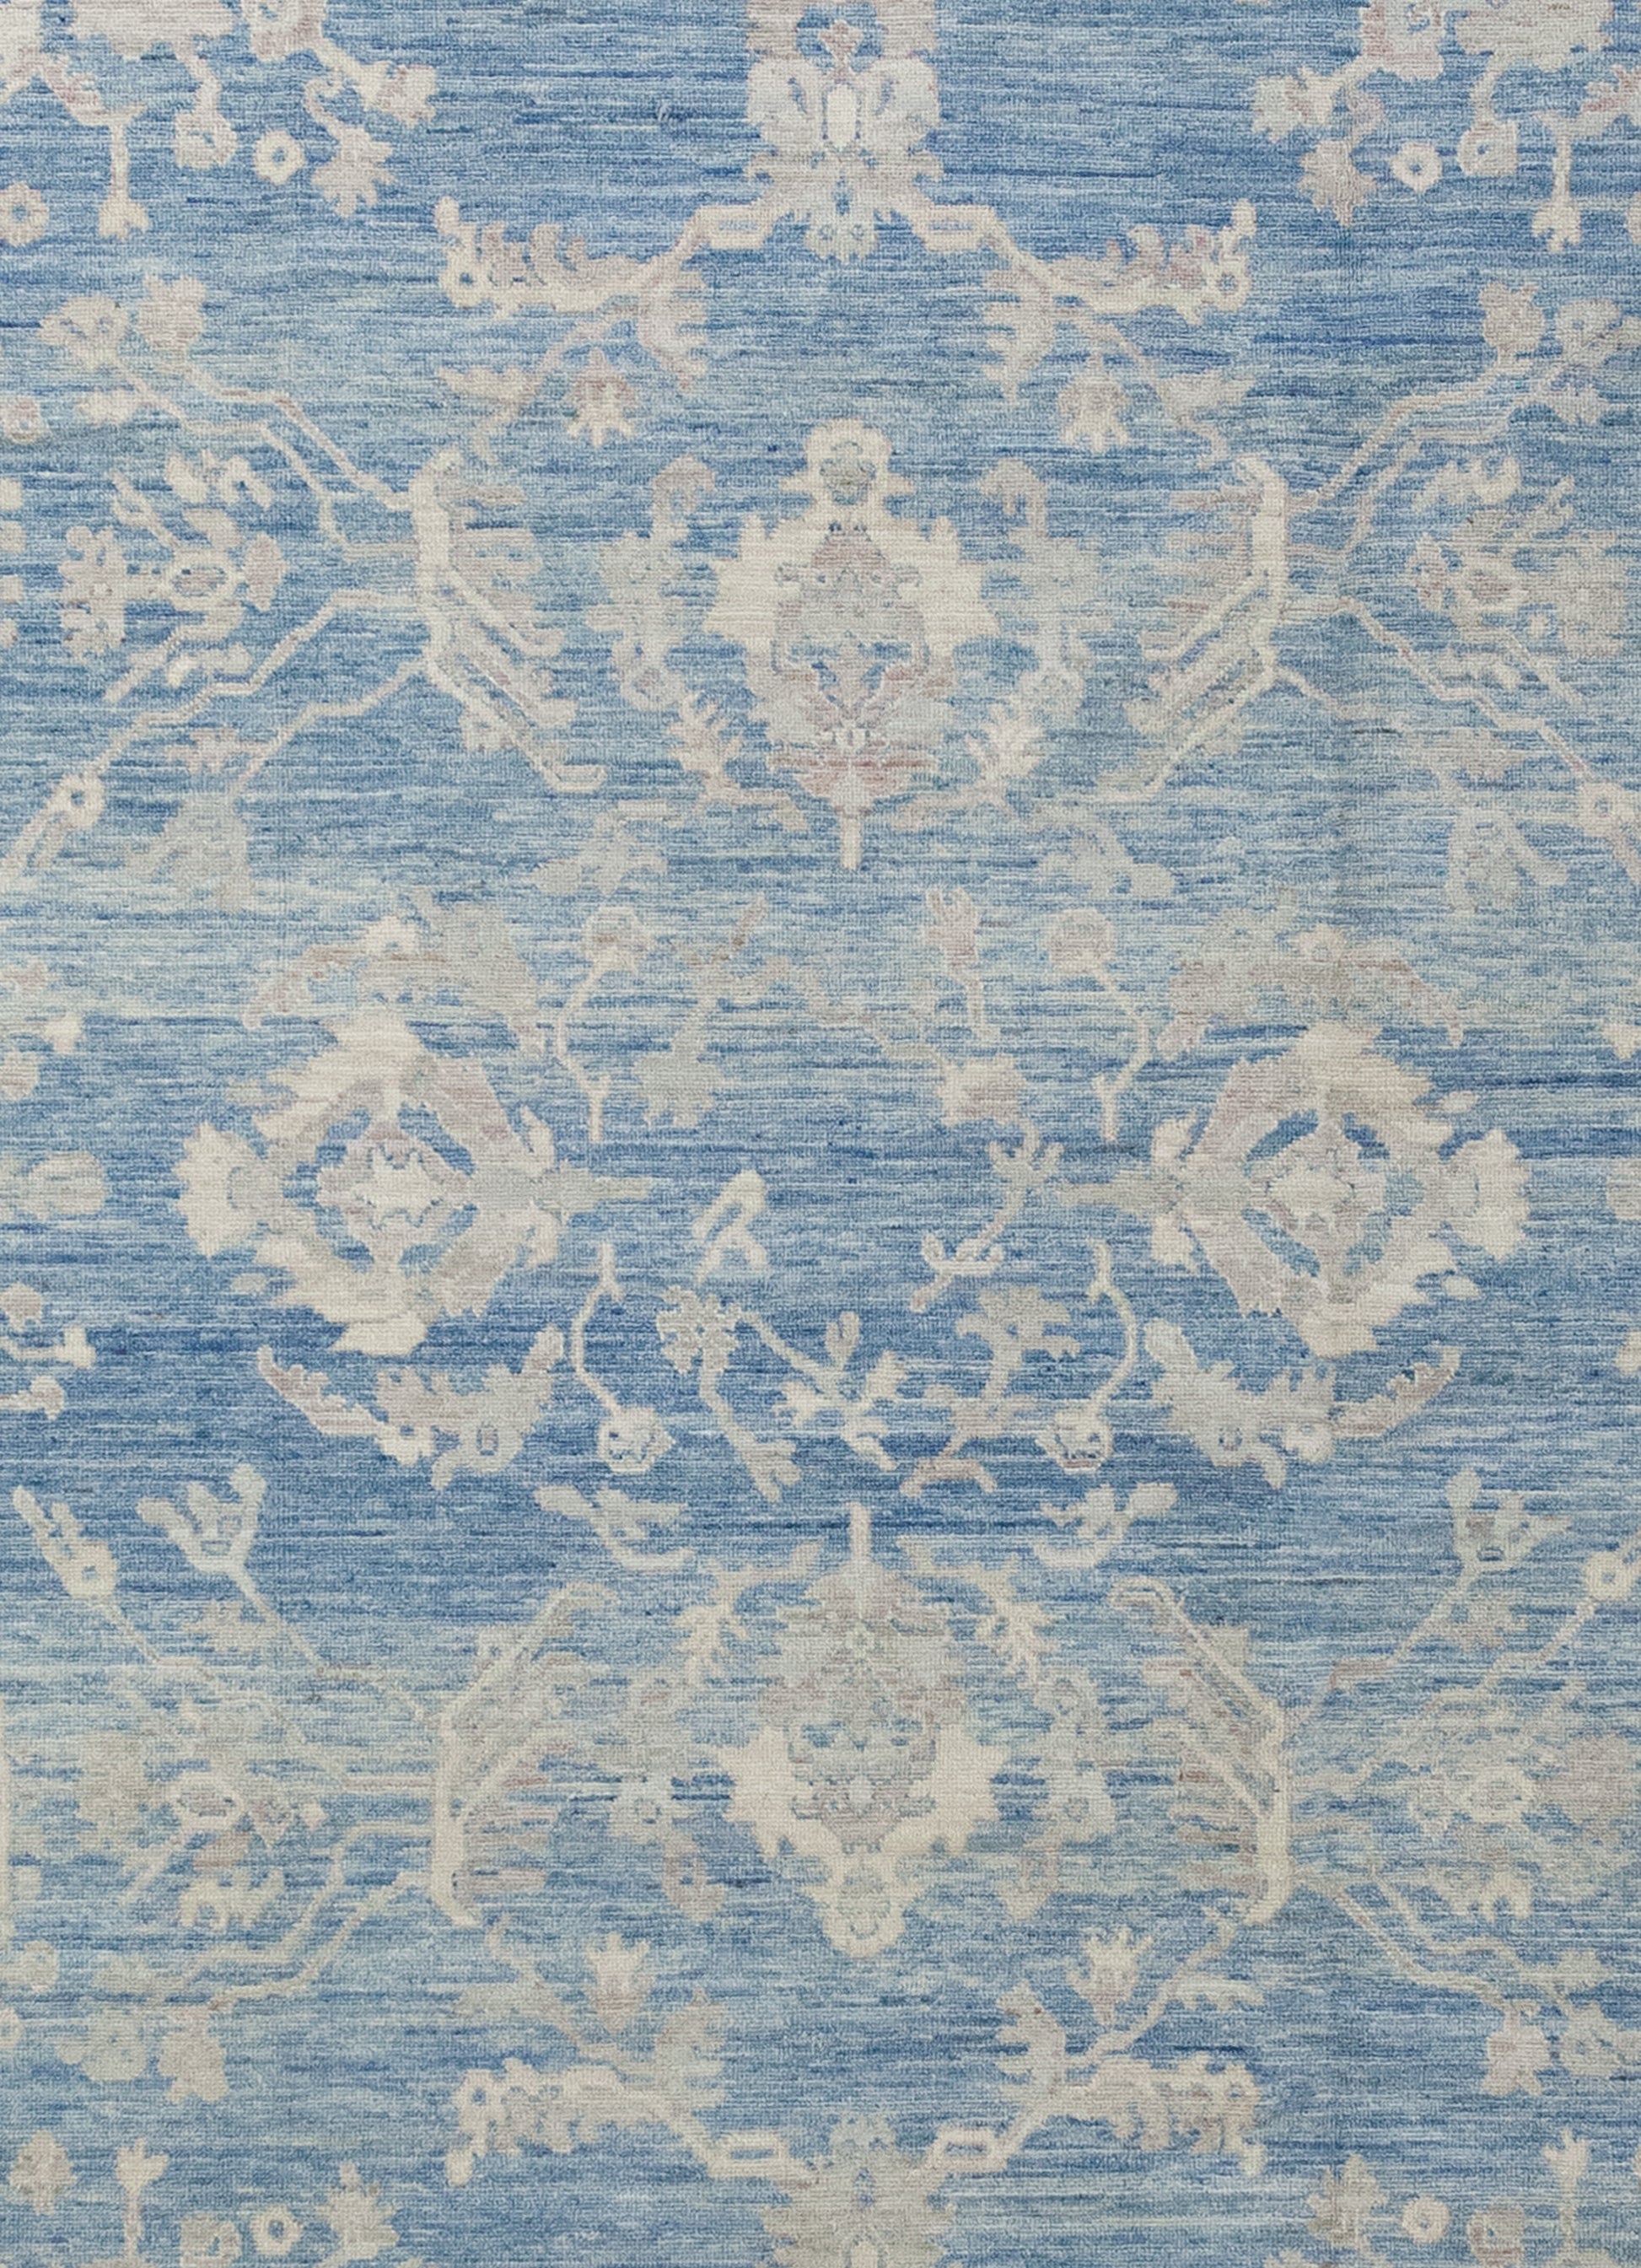 The center of the rug features a large beige ornament to create contrast against the blue background.